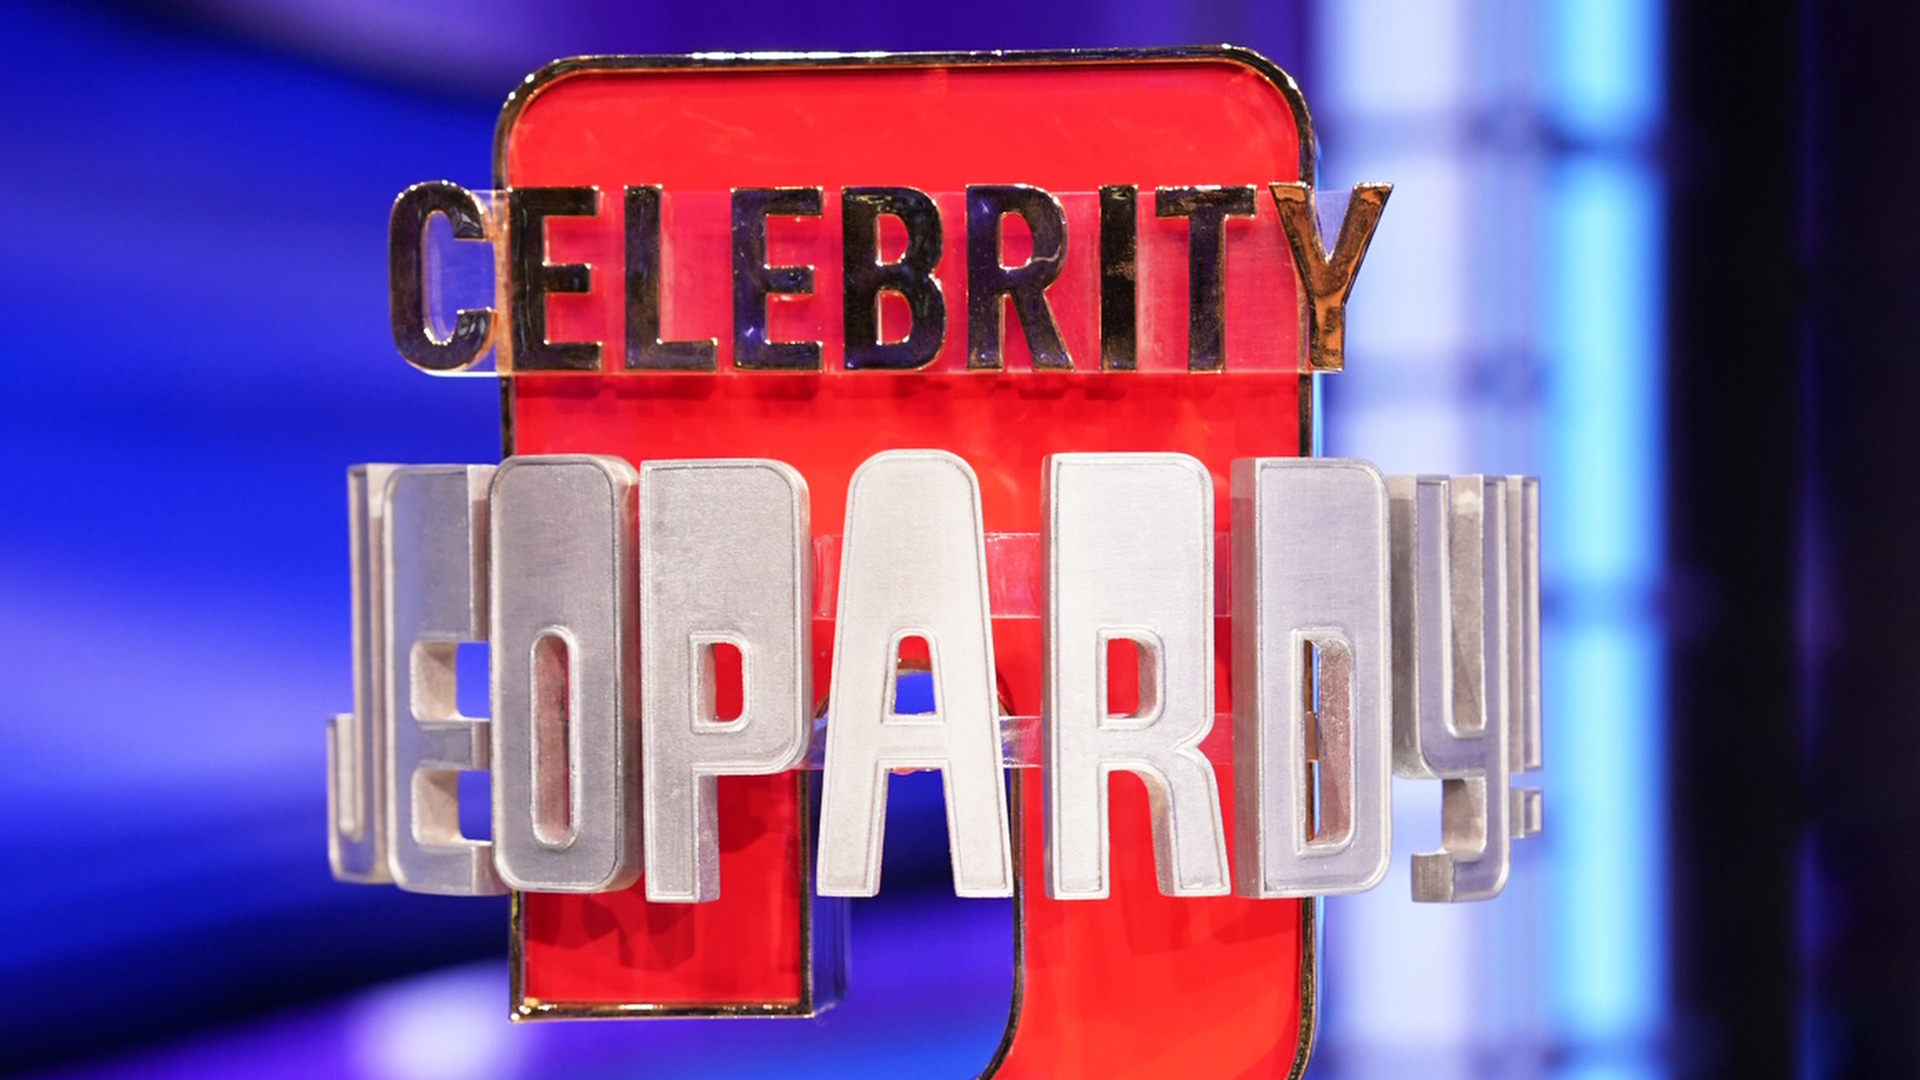 Celebrity Jeopardy! gets renewed as fans highly doubt Mayim Bialik will host and think fired star will never return [Video]